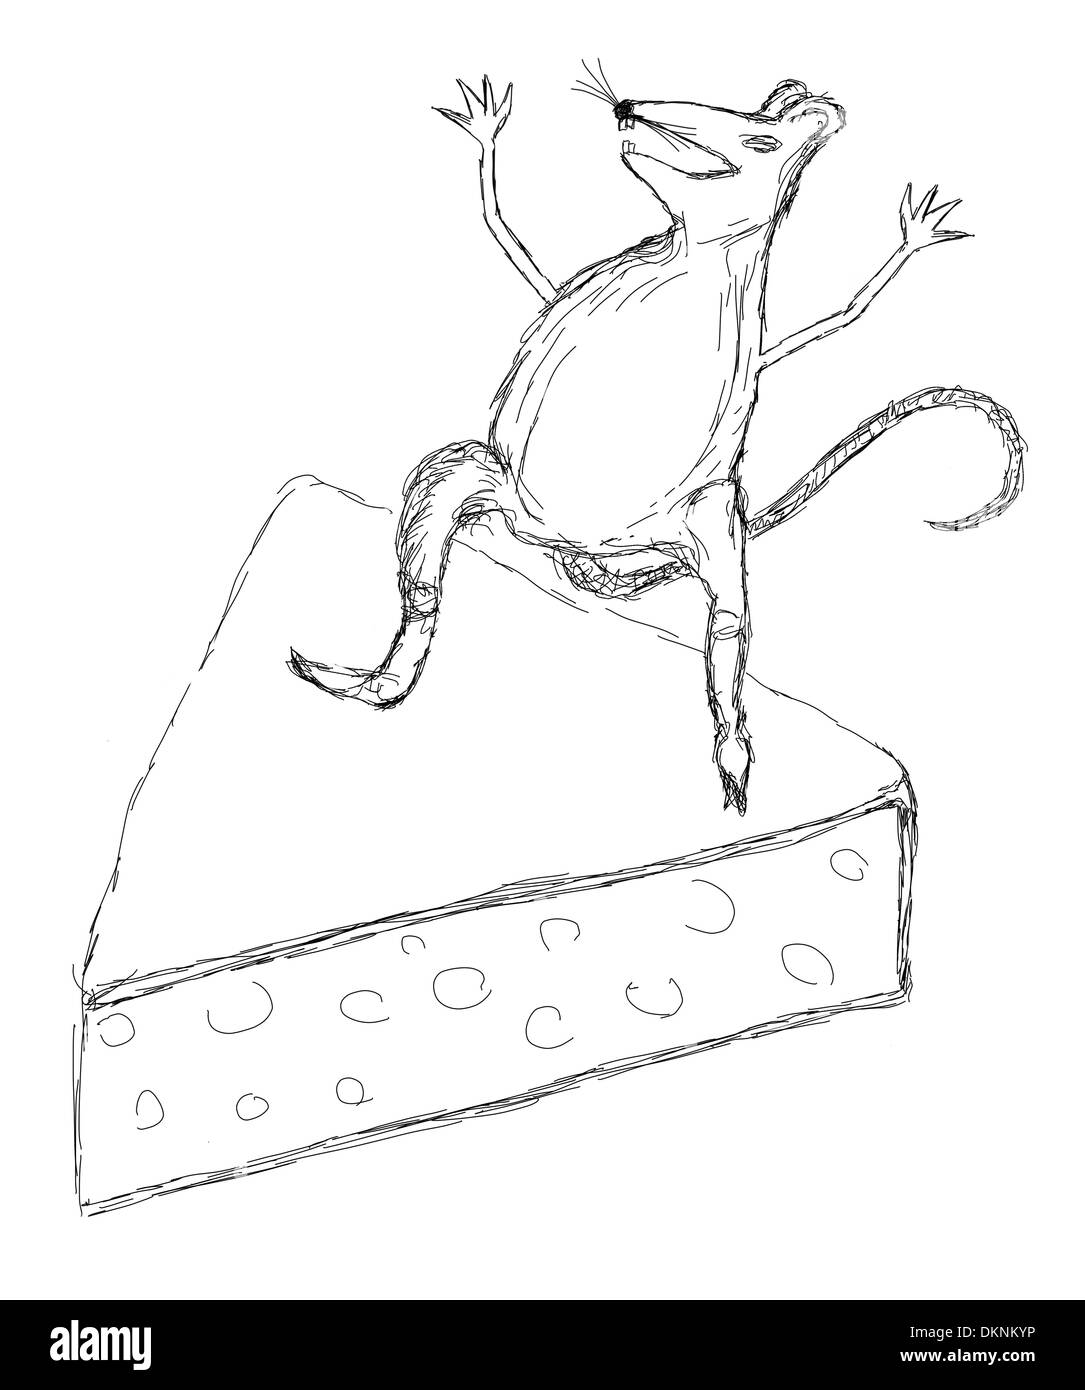 Illustration or drawing of a rat standing hands up on a piece of cheese. Stock Photo